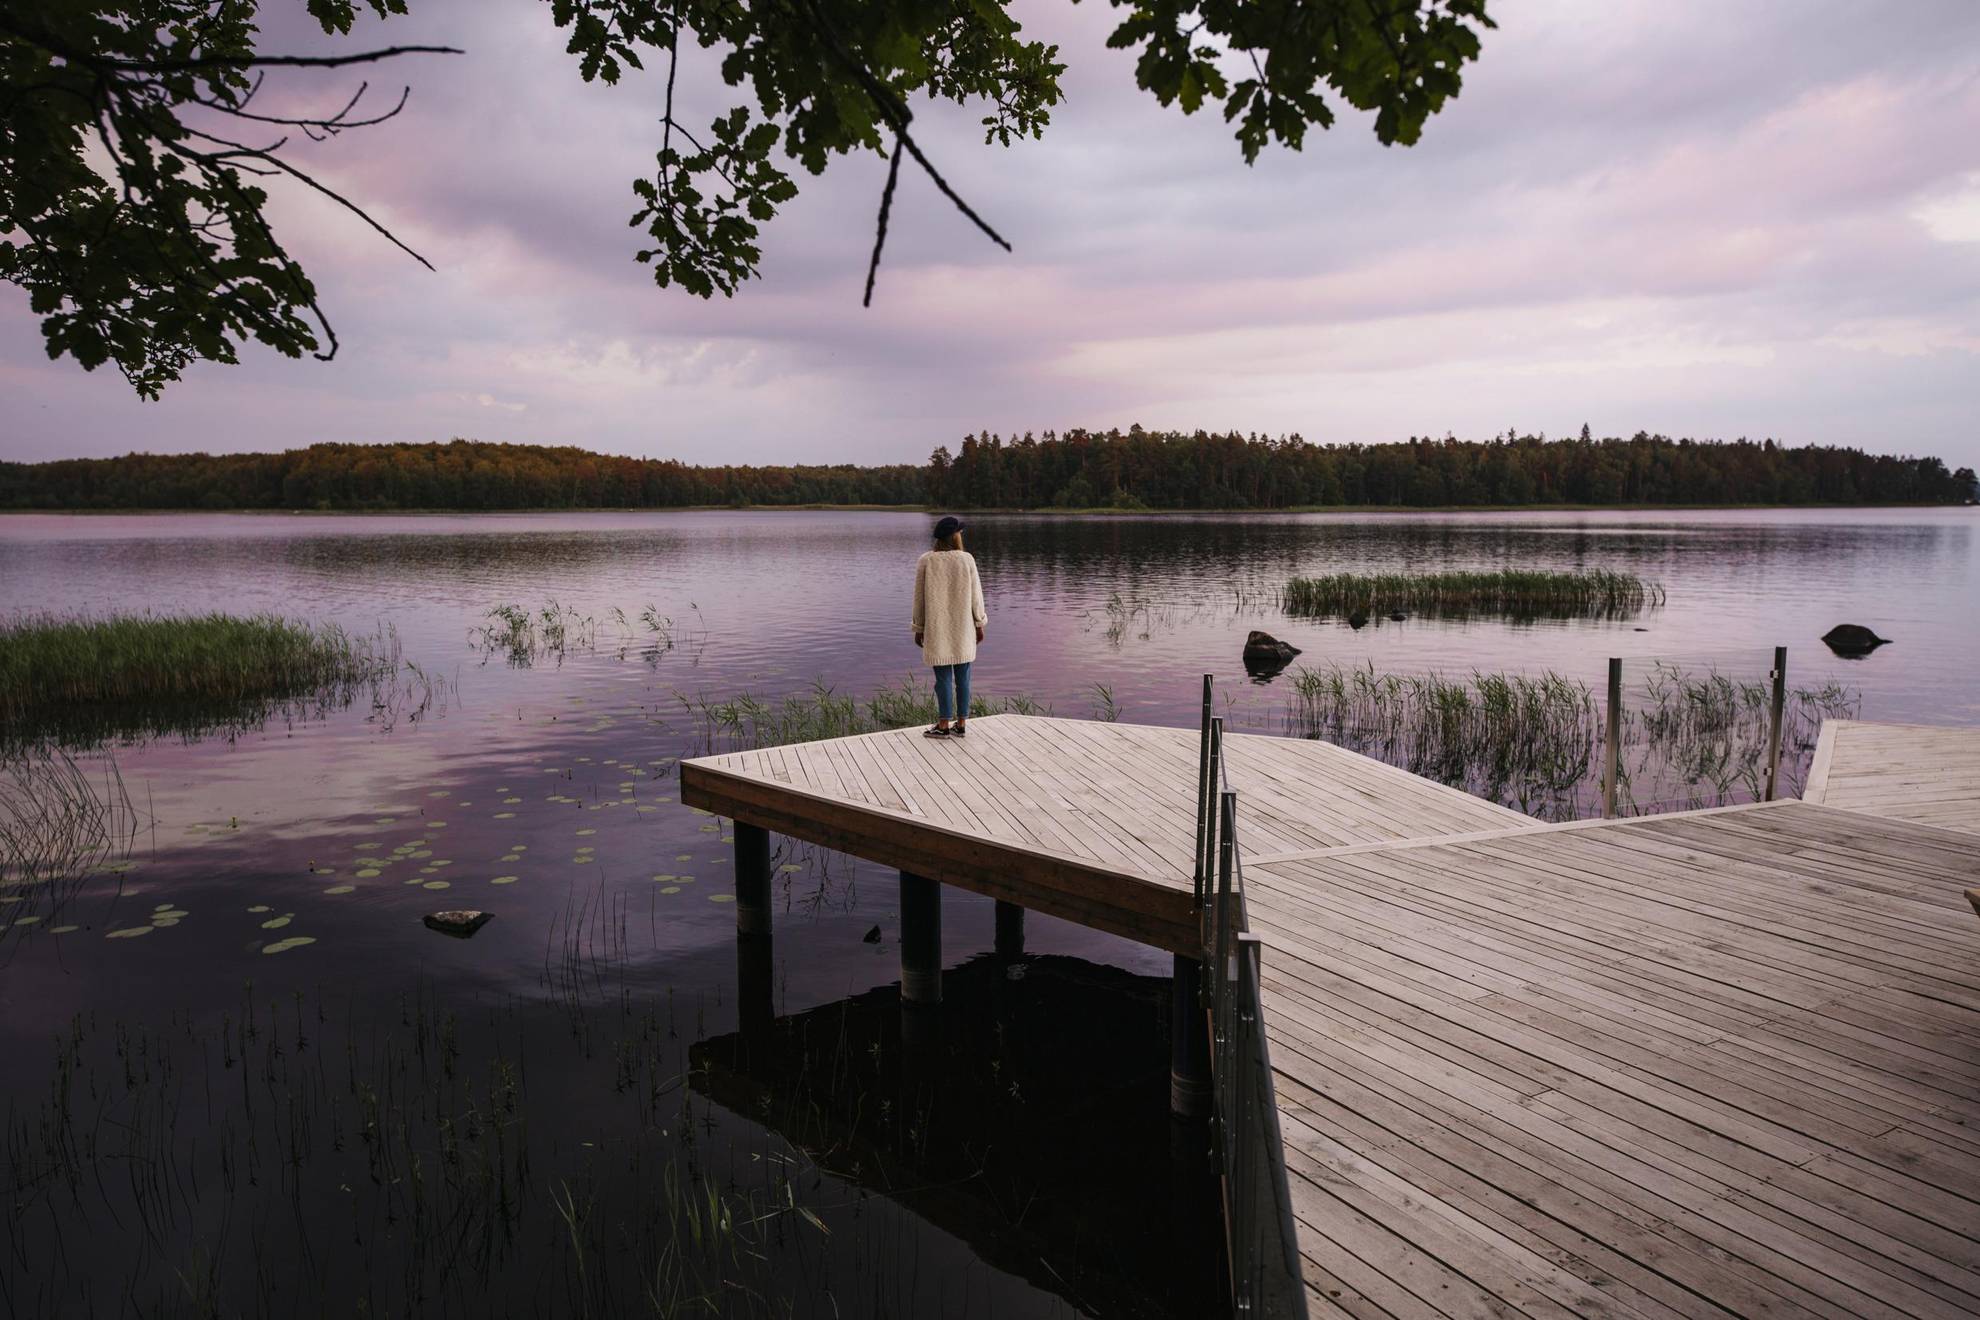 A woman is standing on the edge of a jetty while enjoying the view of a lake.